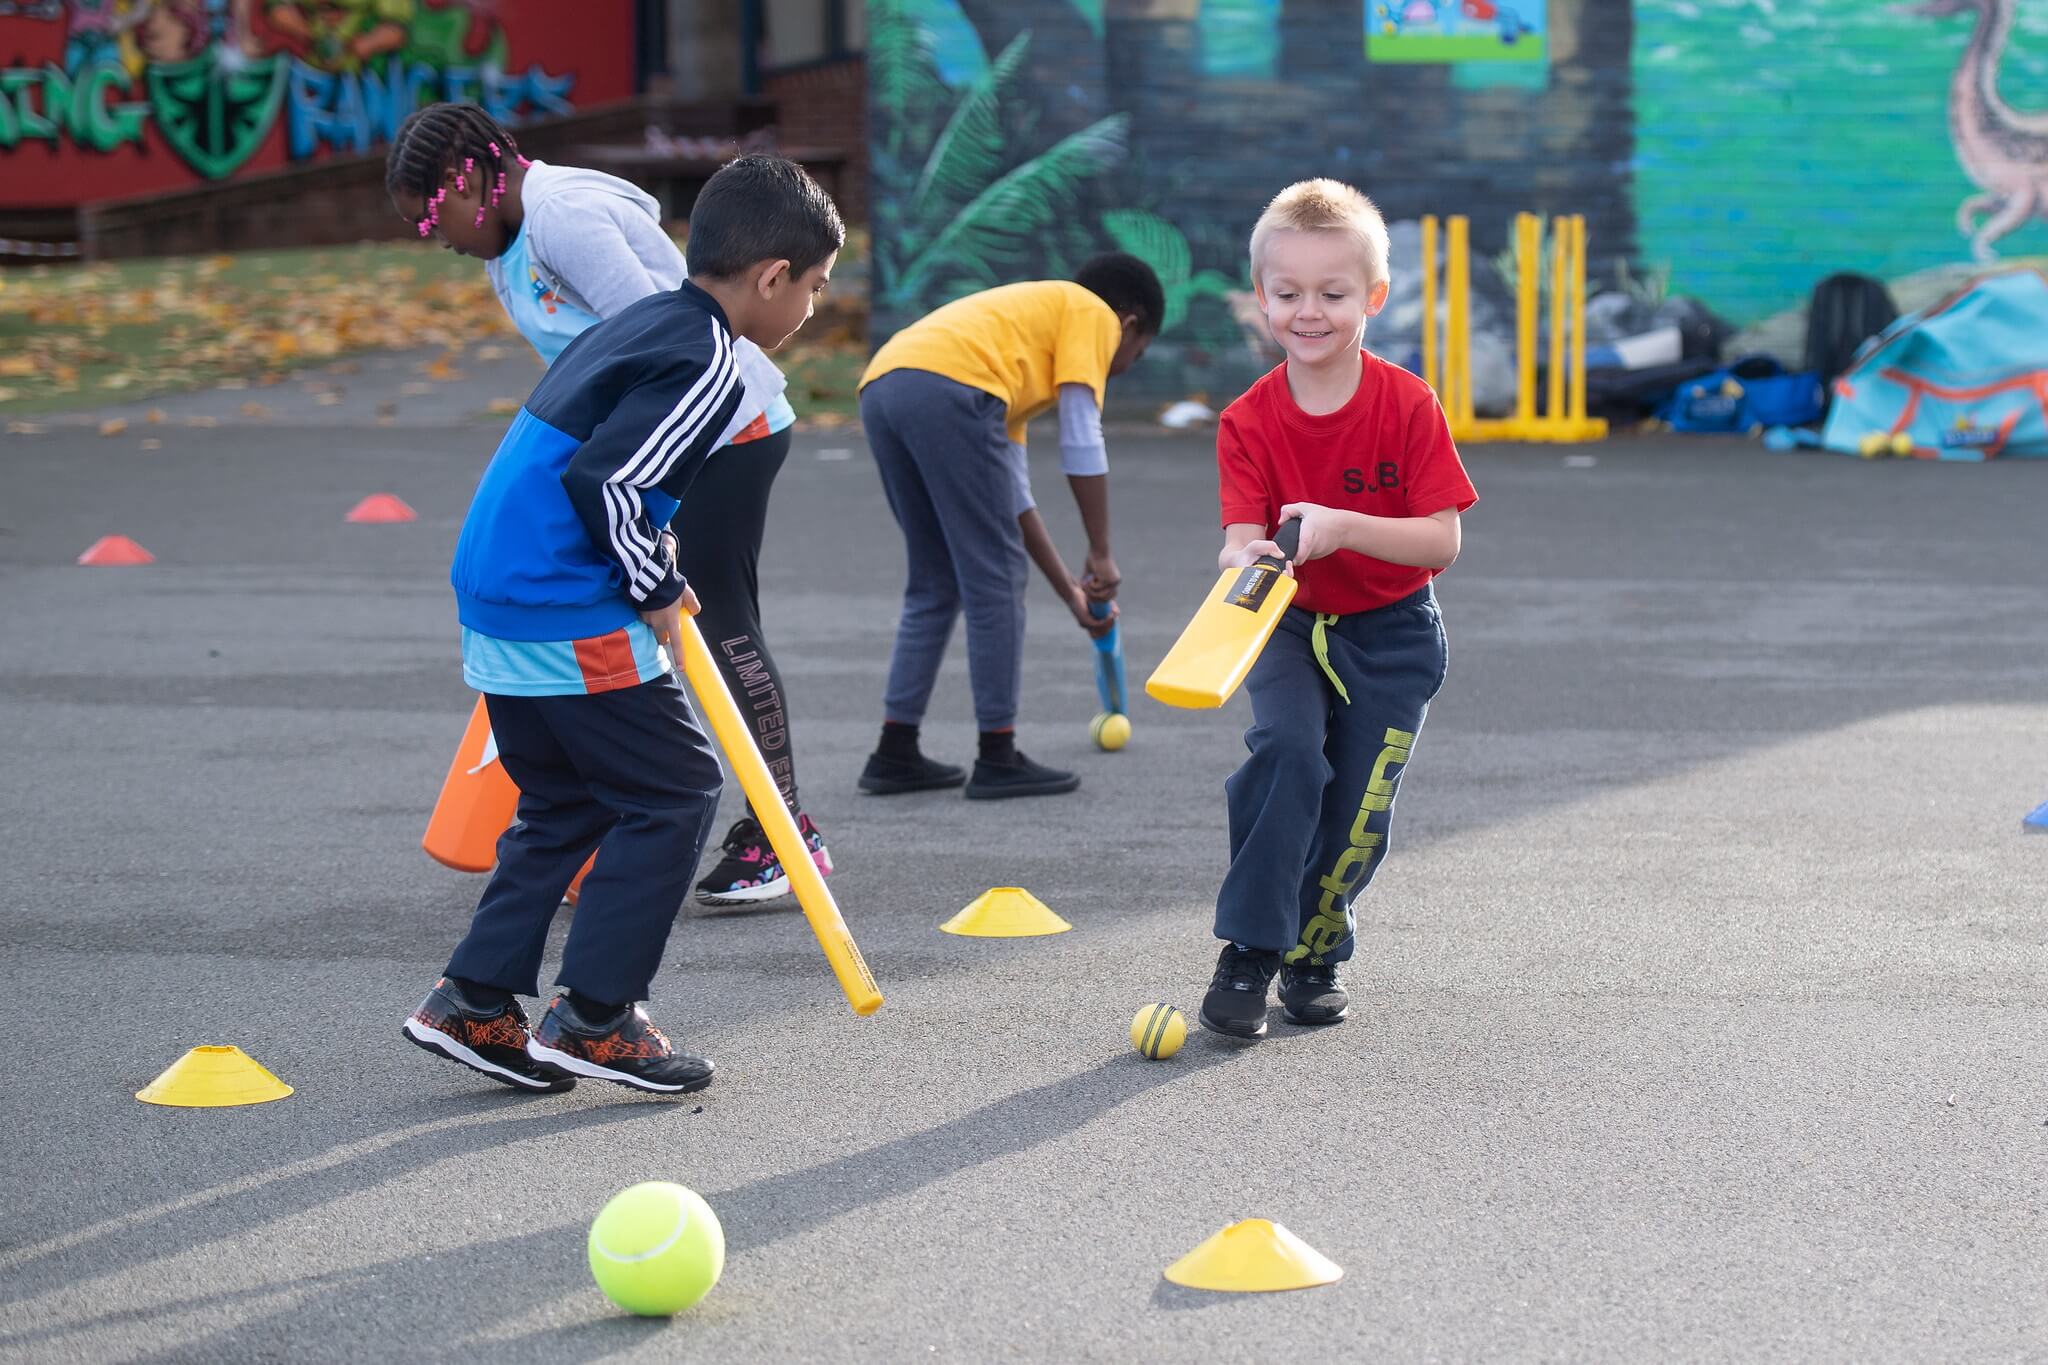 Children practise their dribbling skills using cricket bats and stumps to move the ball 